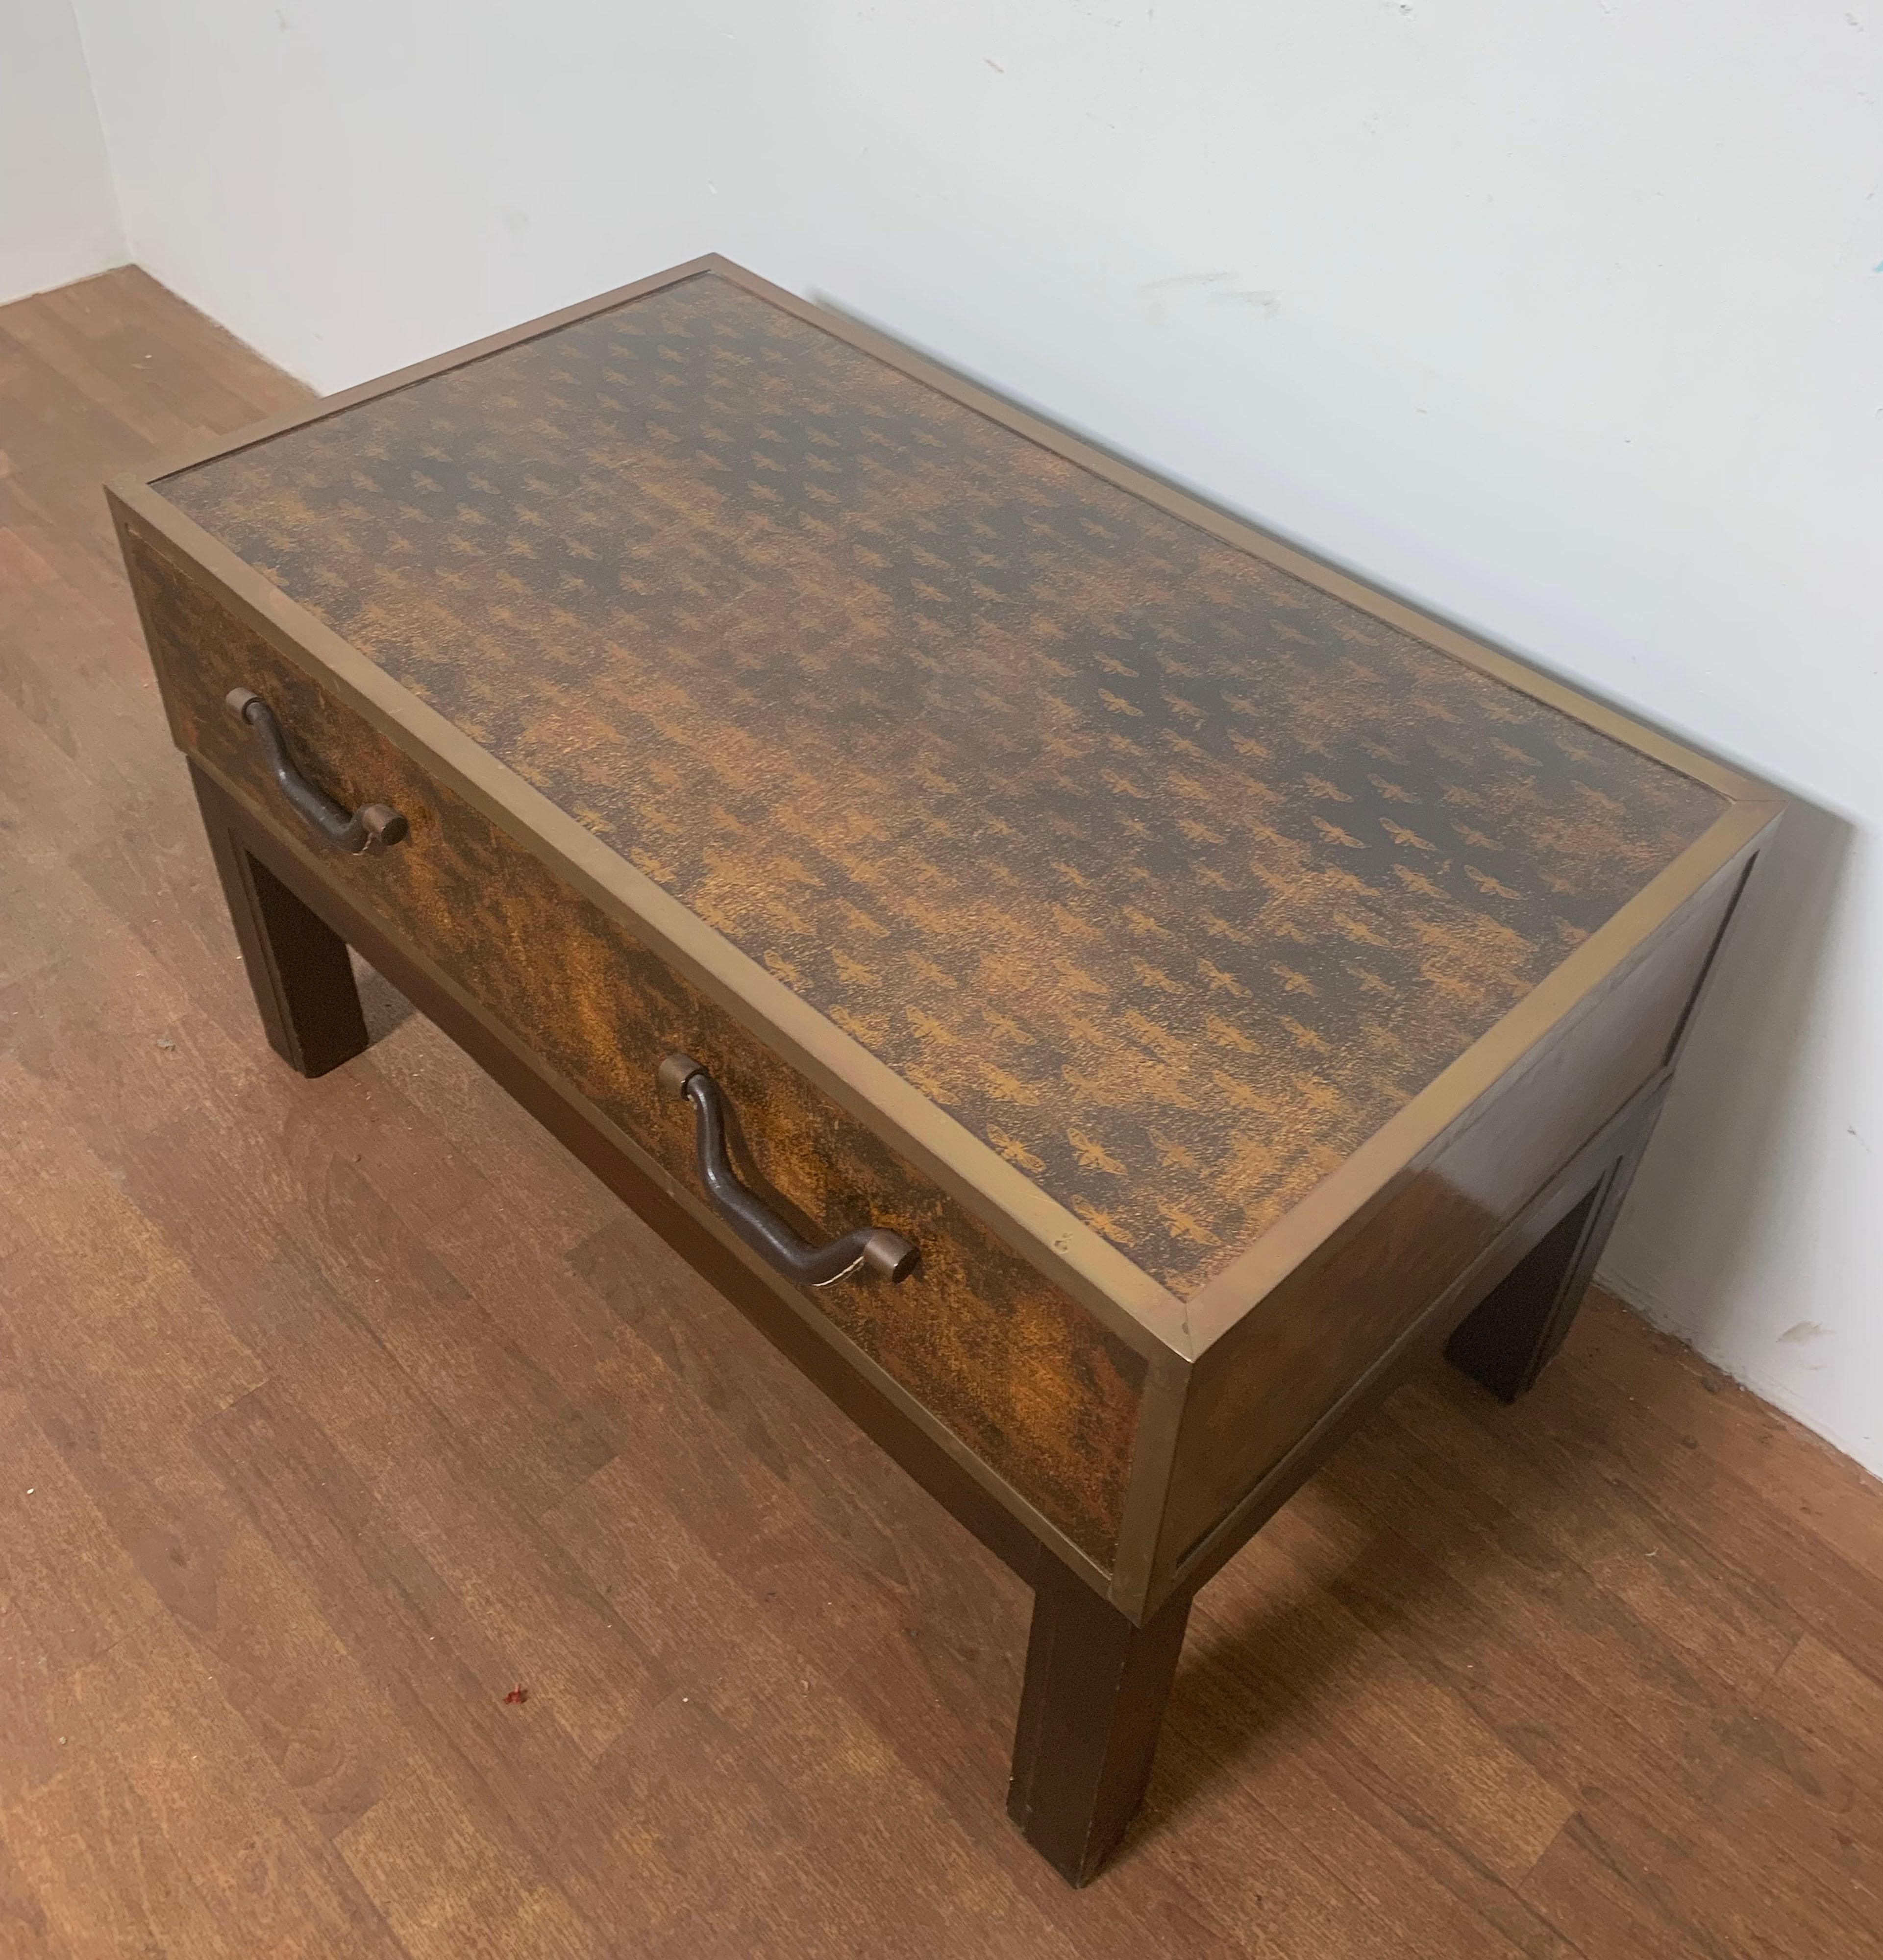 Campaign style brass bound chest on stand, clad in “Napoleonic Bee” parchment, with single drawer and leather handles, circa 1970s. Functions as a coffee or occasional table as well.